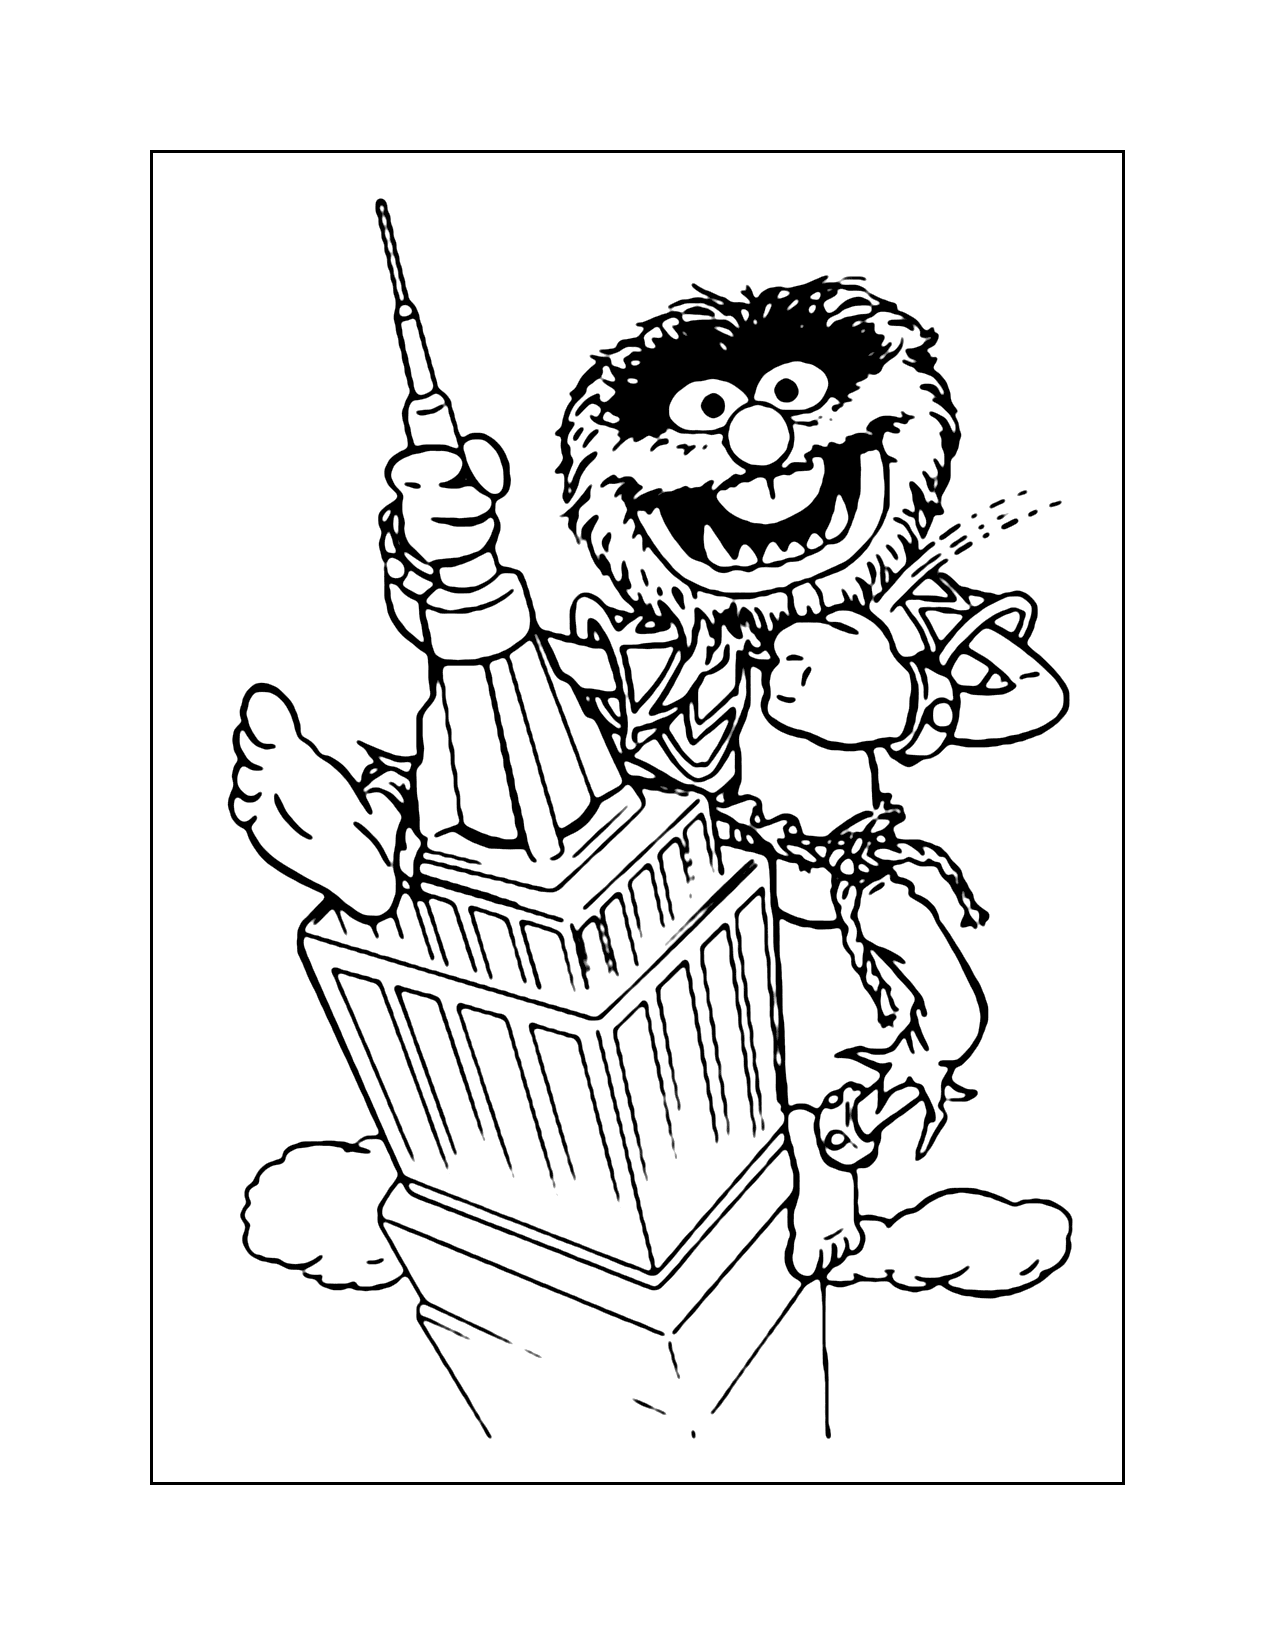 Animal Climbing Empire State Building Coloring Page